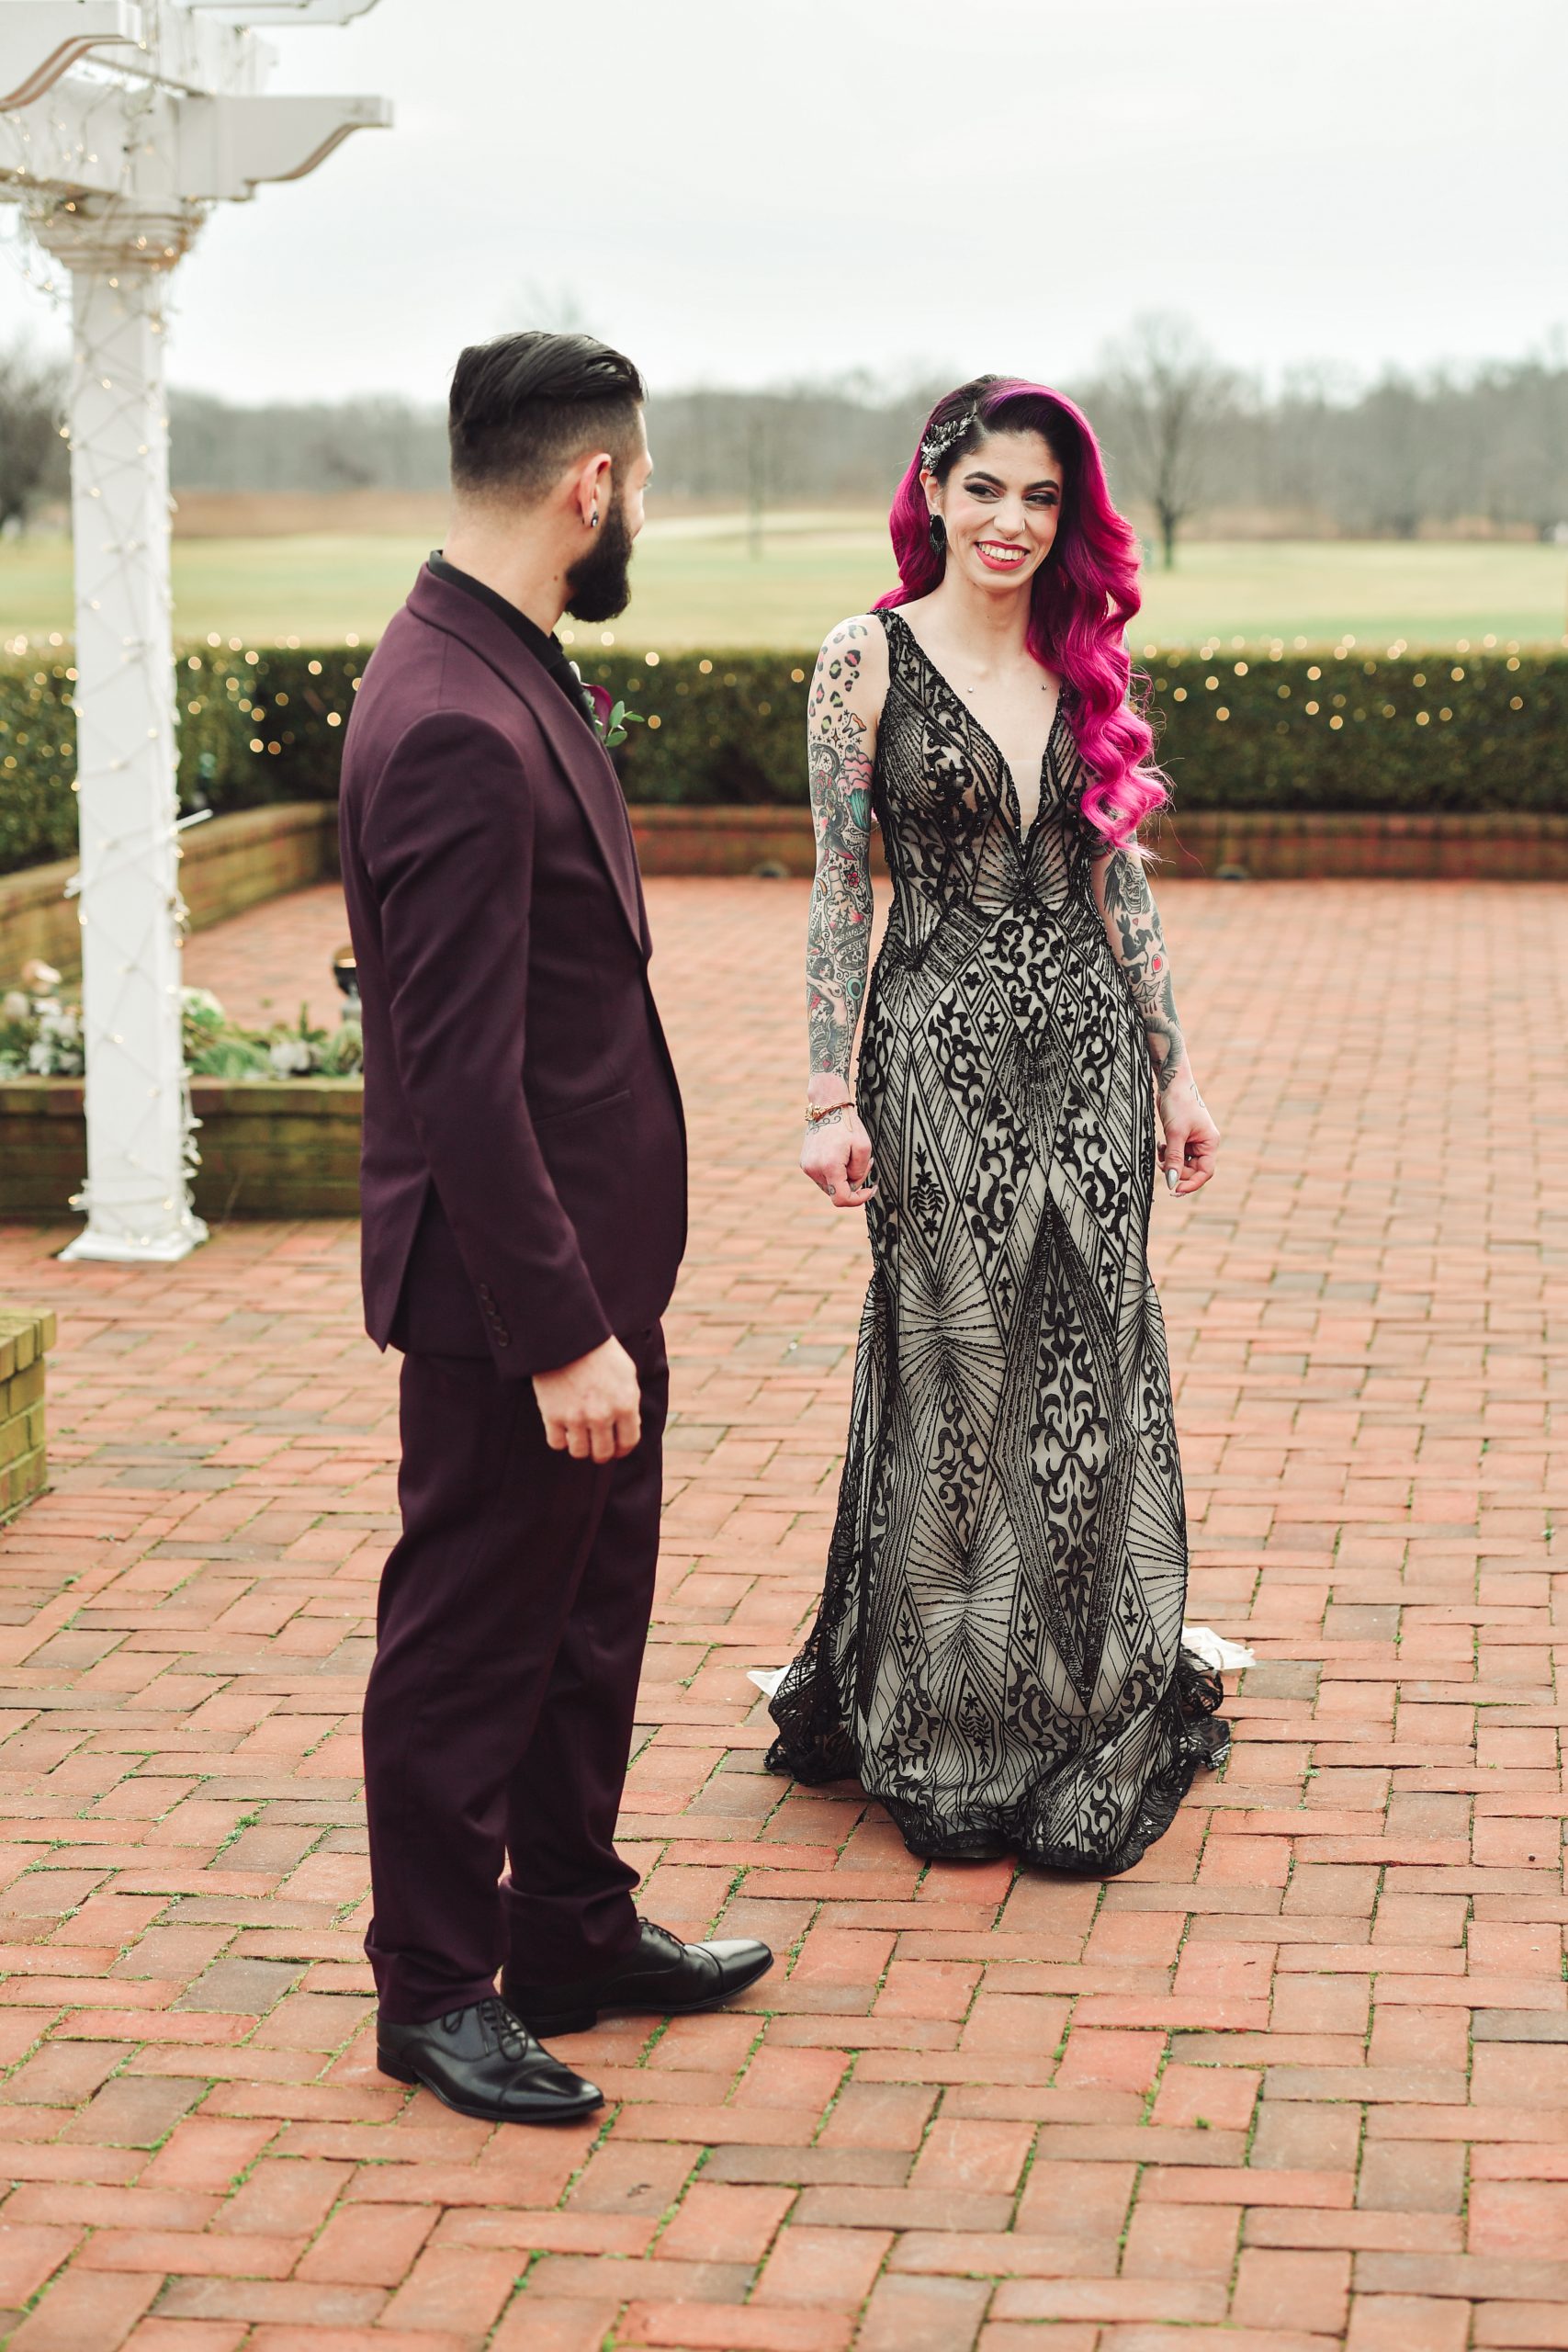 Bride With Pink Hair Wearing Sexy Black Wedding Dress Called Elaine By Maggie Sottero With Husband In Burgundy Suit